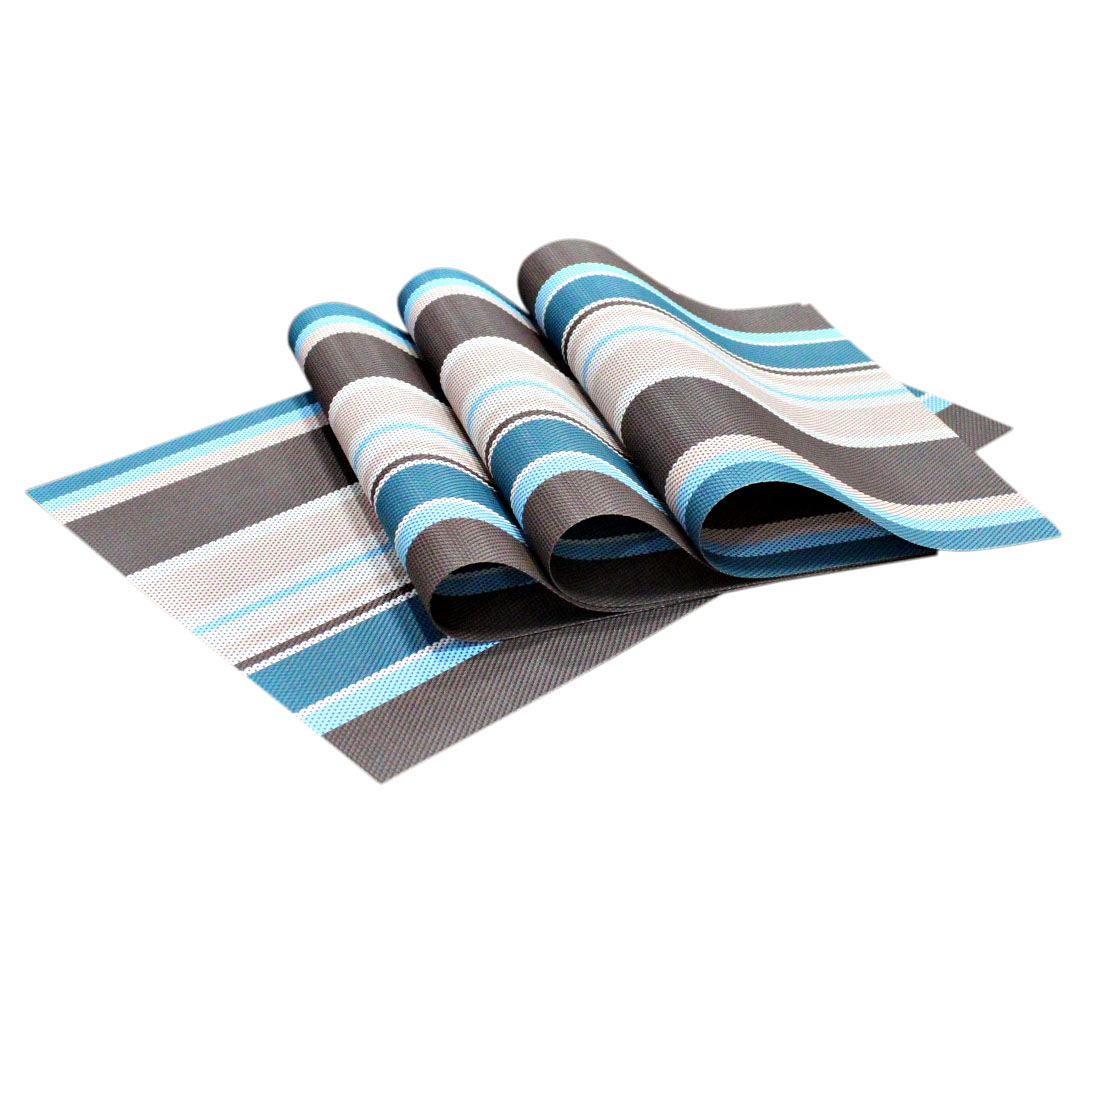 ORKA PVC Dining Table Placemat 4-Piece Set-Multicolor  